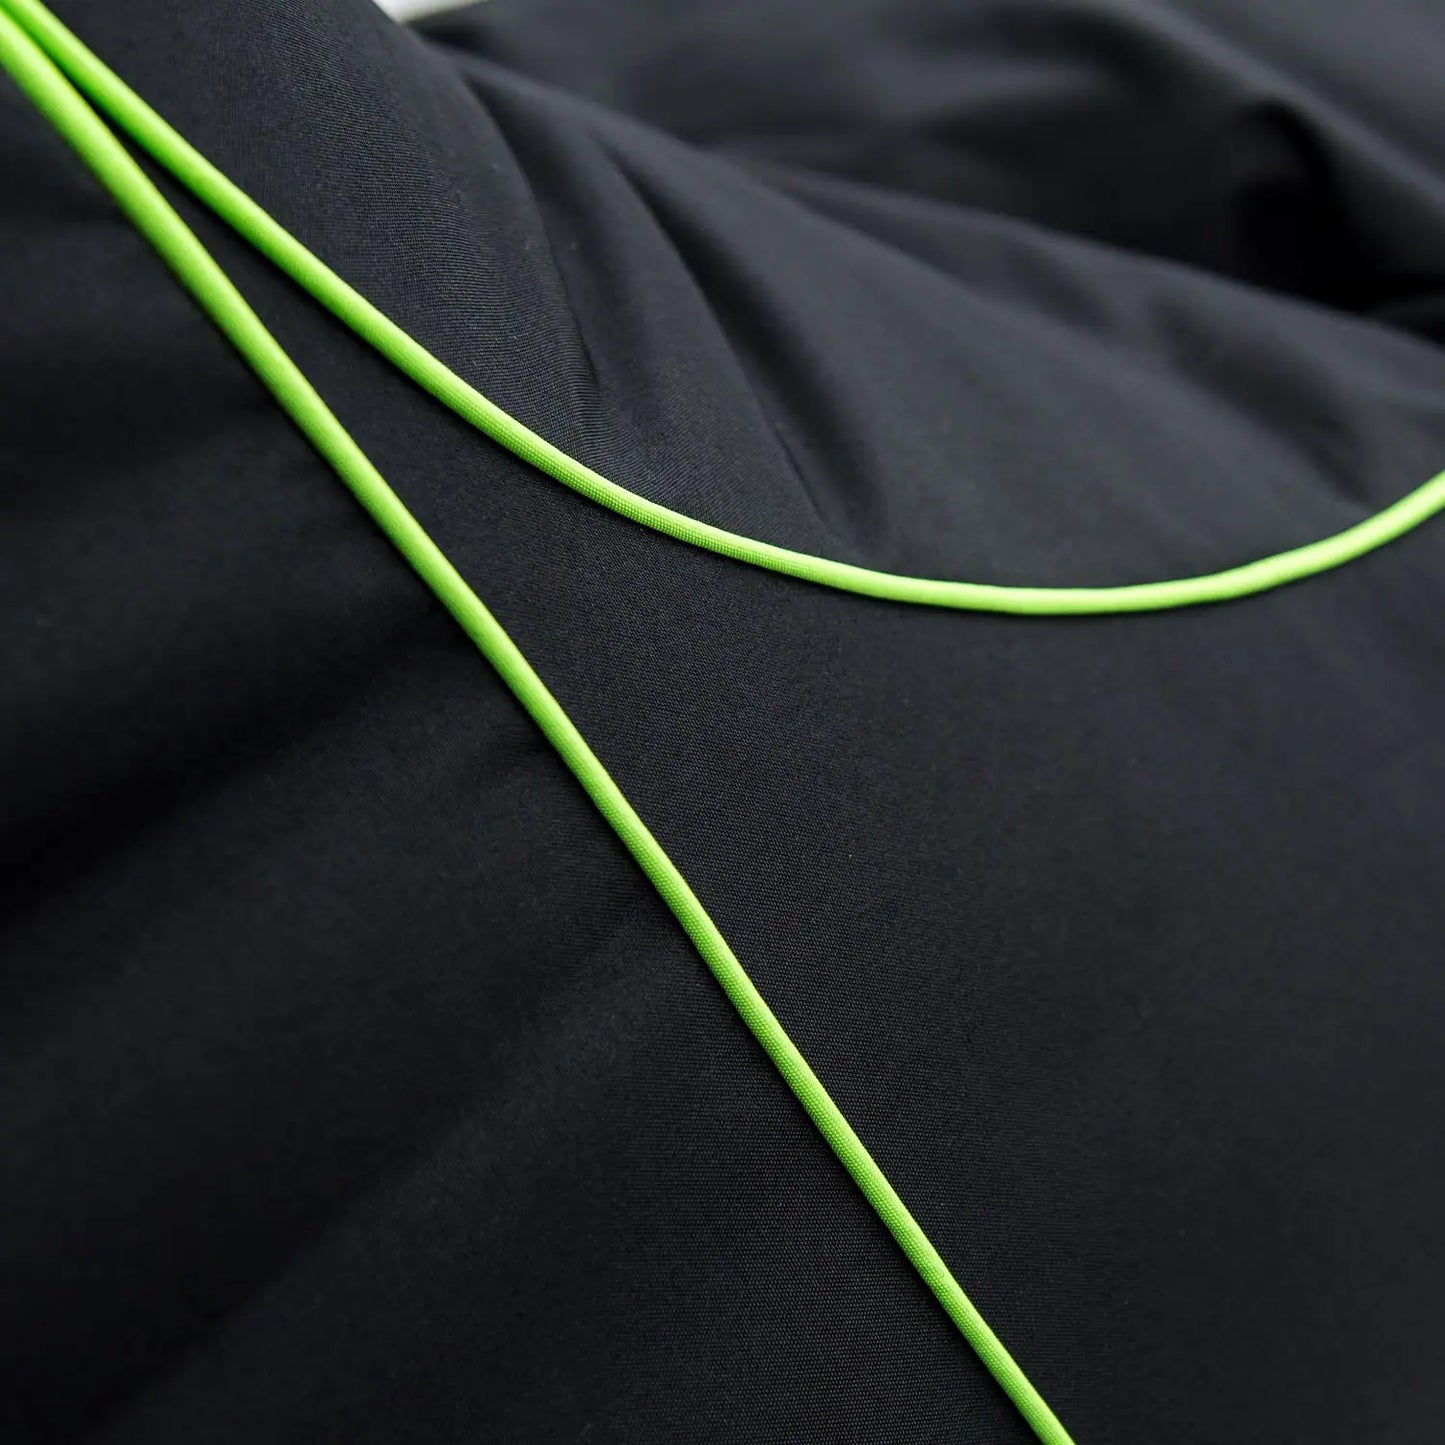 Black fabric with green stitching, close-up.